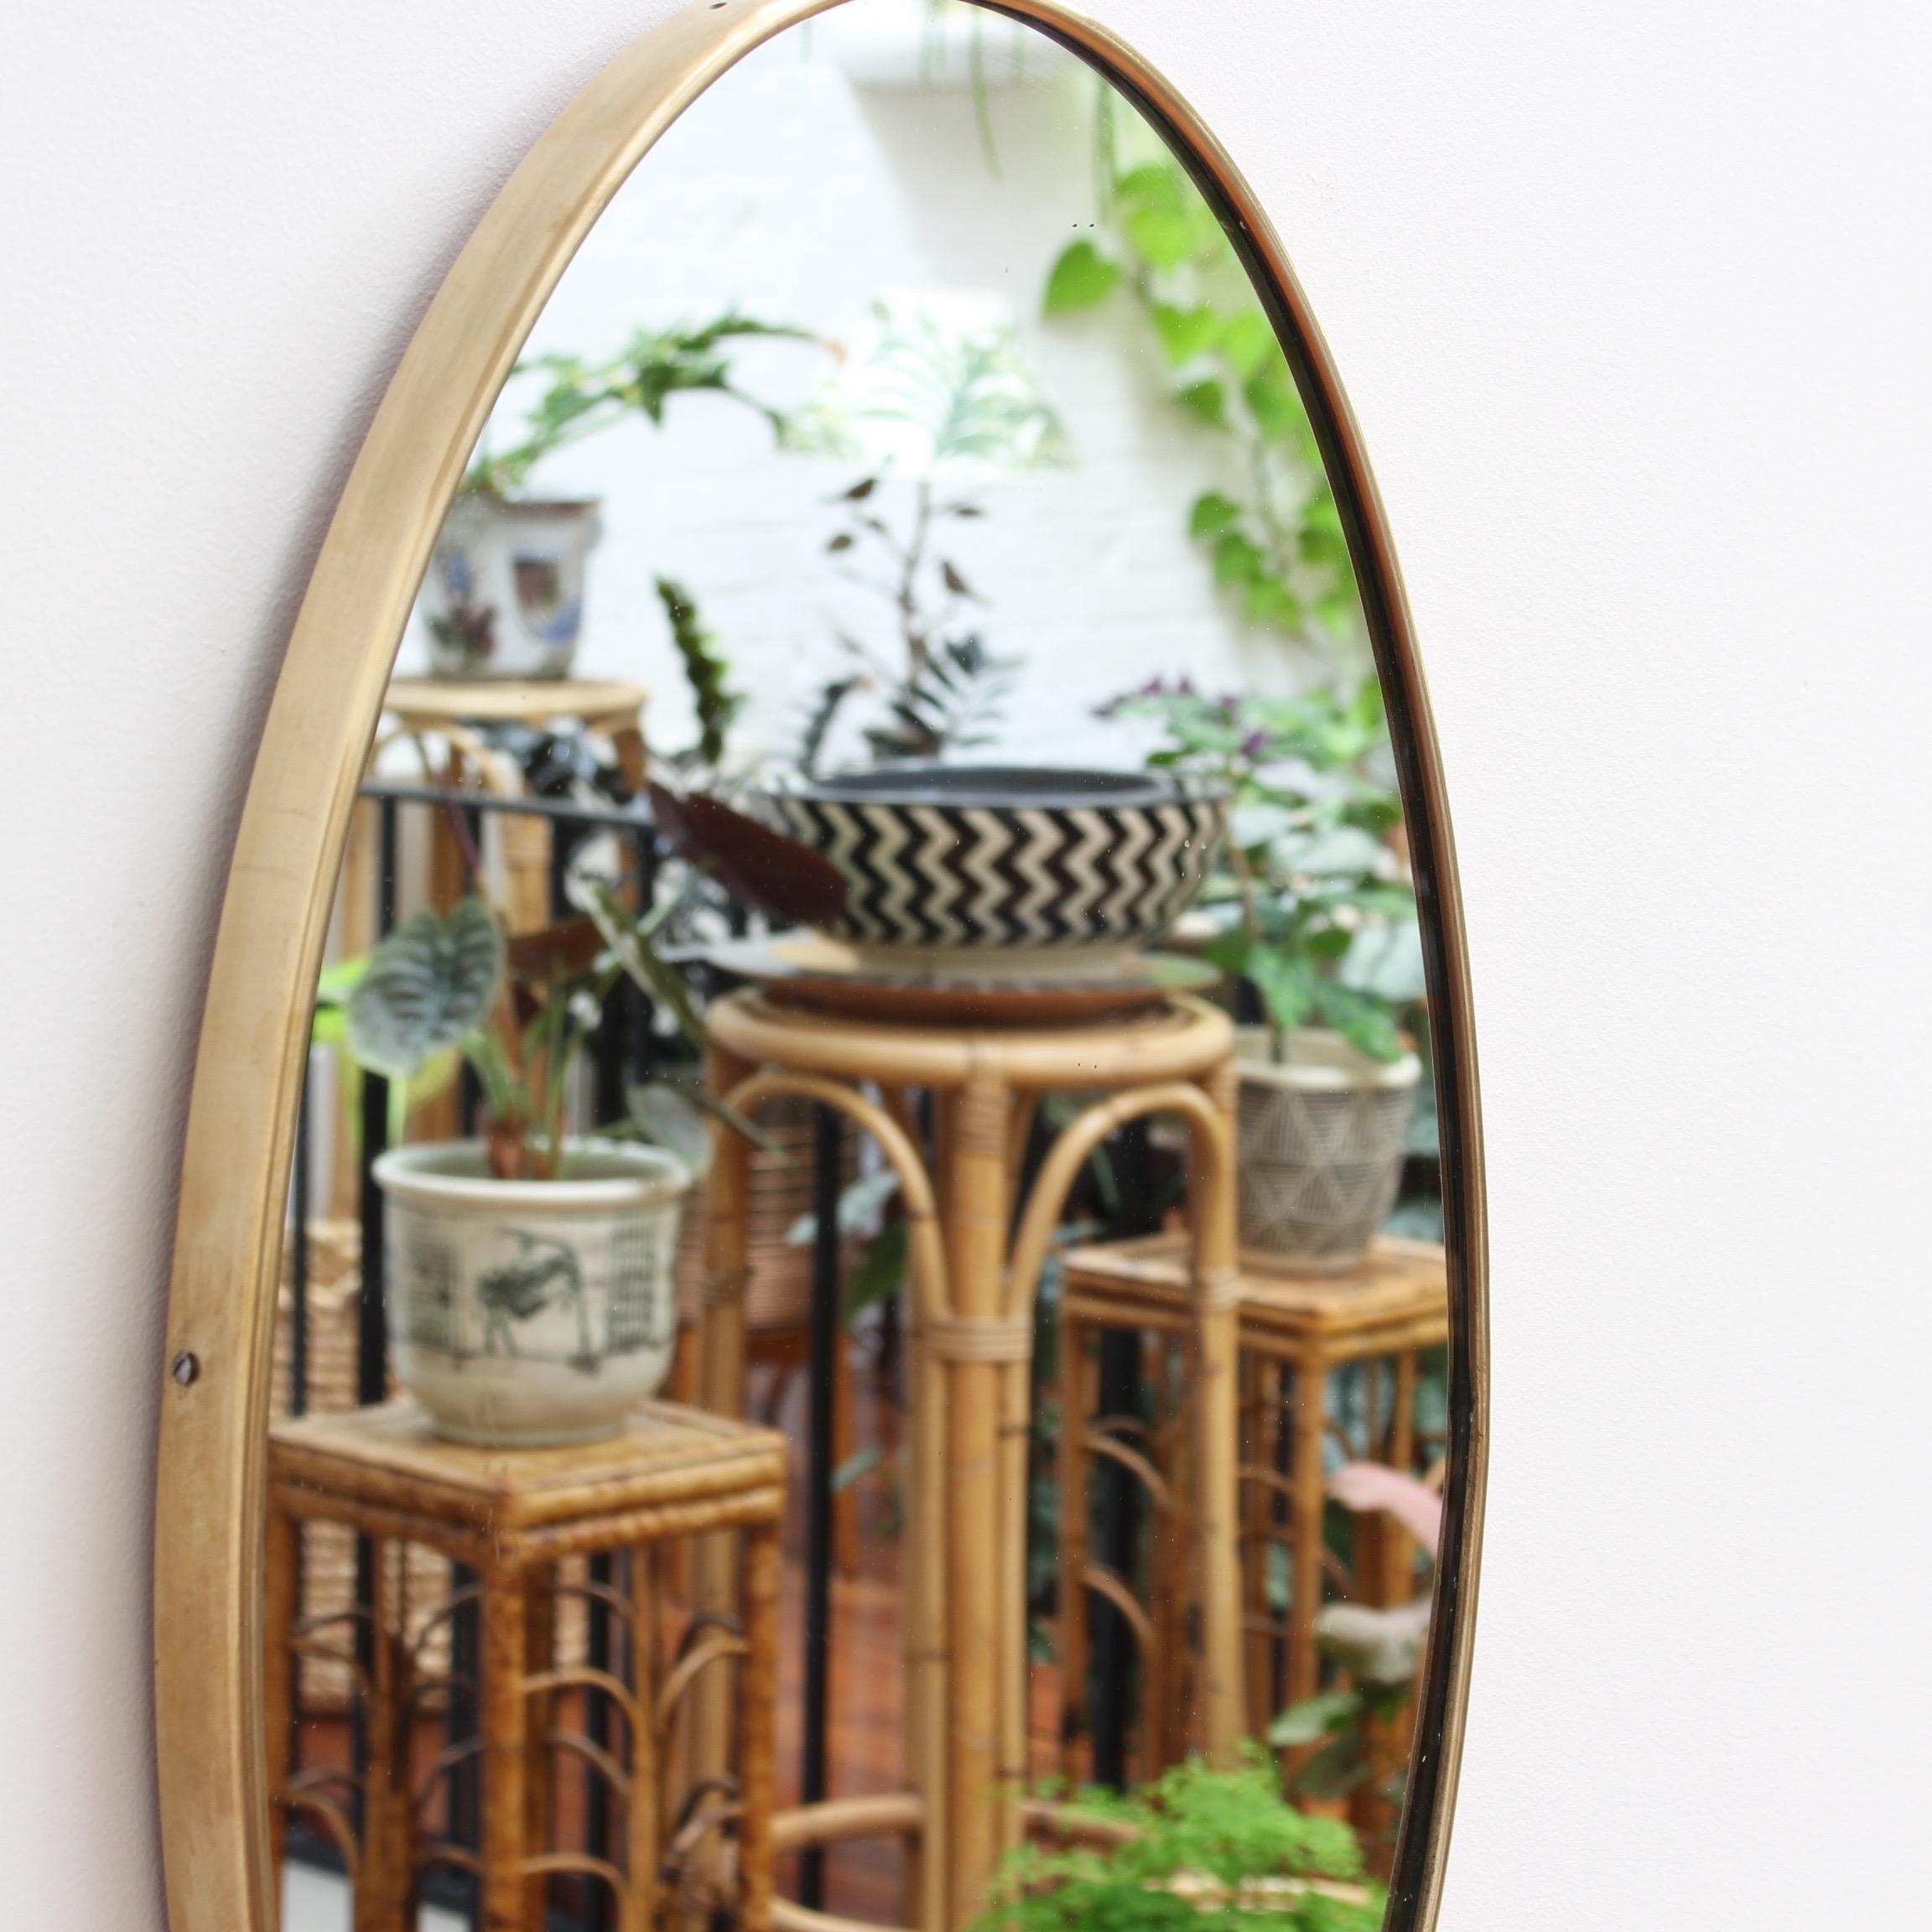 Mid-20th Century Midcentury Oval-Shaped Italian Wall Mirror with Brass Frame, 'circa 1950s'